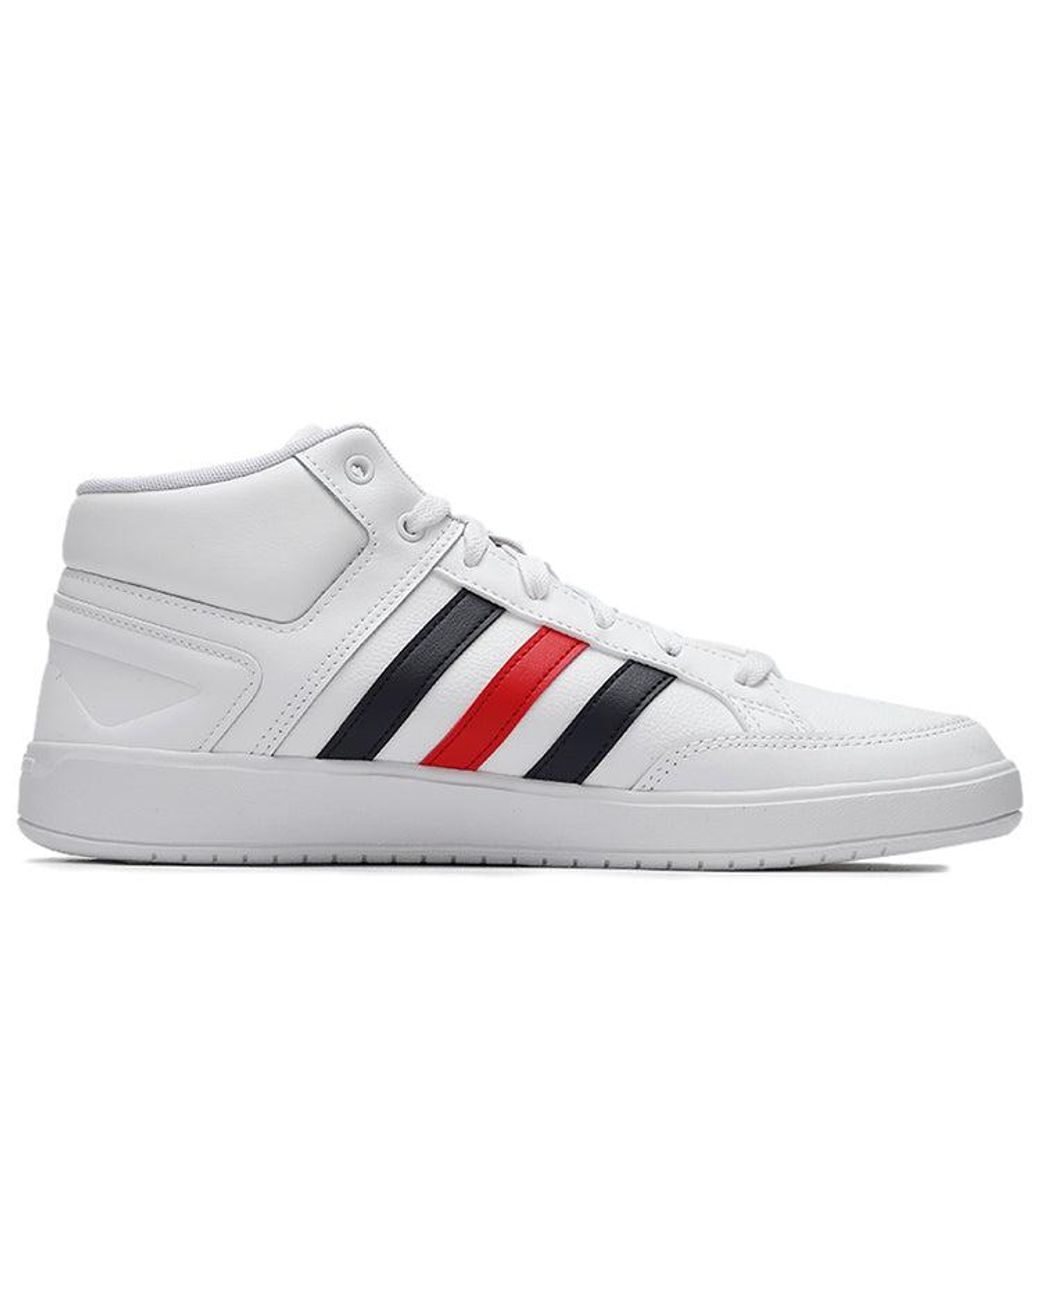 adidas All Court Mid Shoes Black/white/red for Men | Lyst